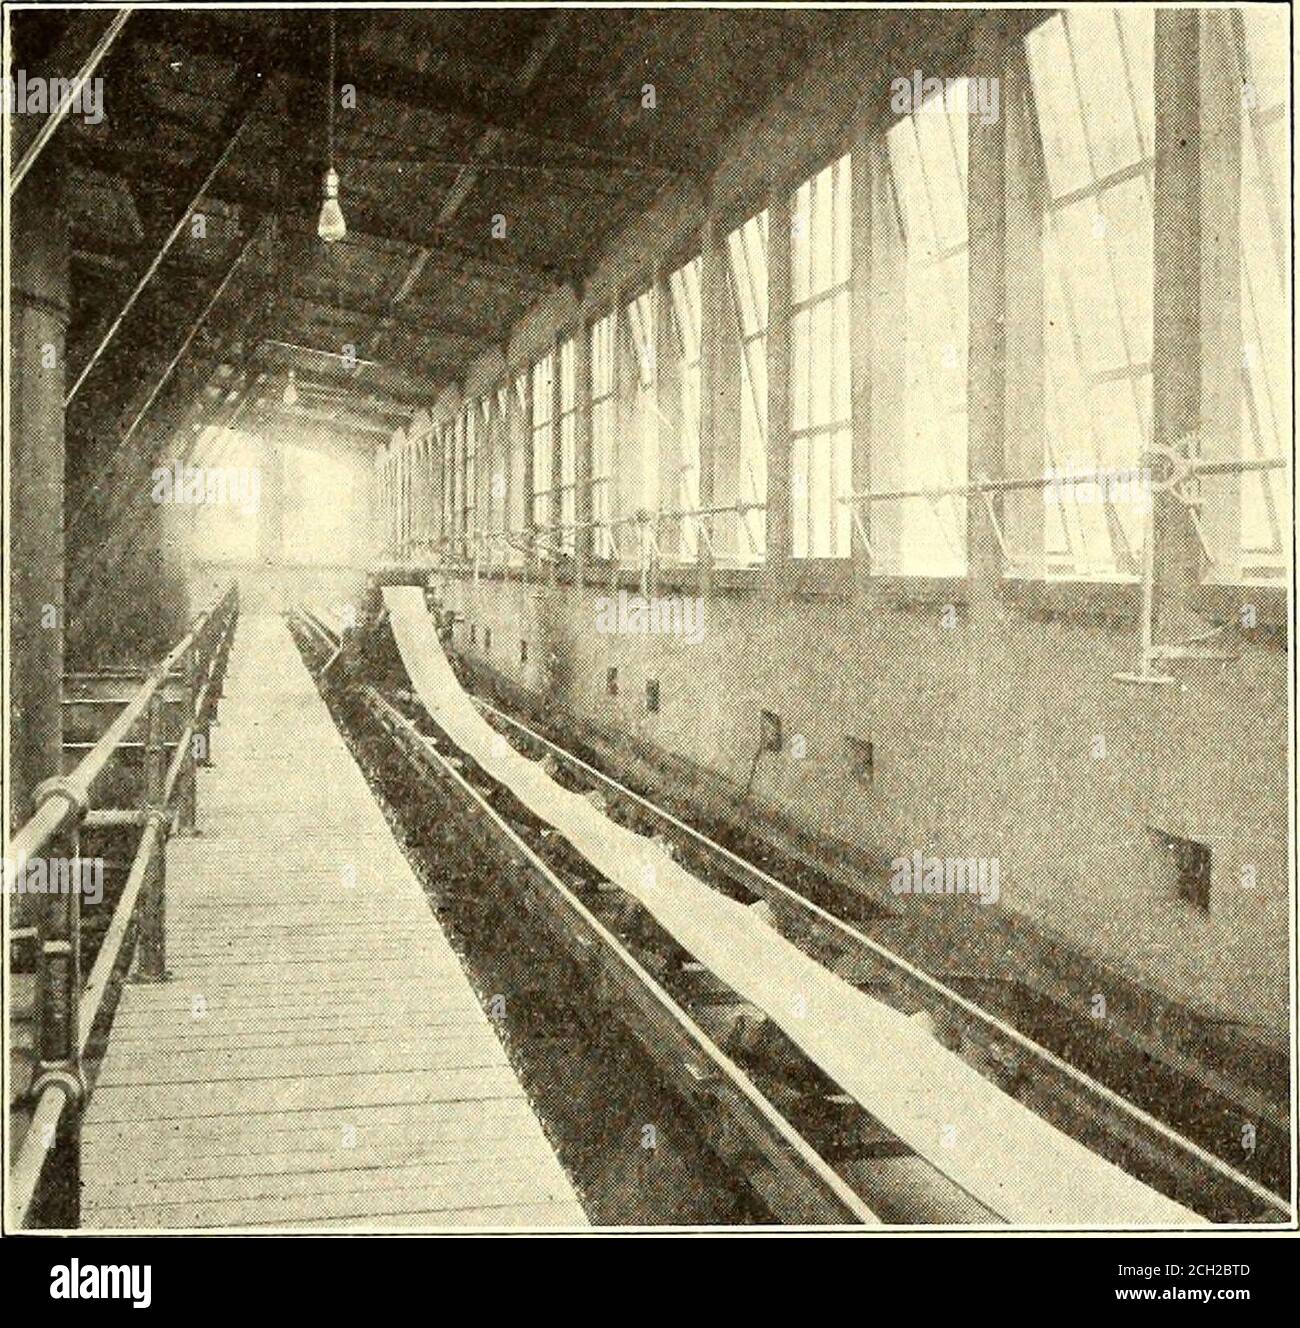 . Electric railway journal . March 5, 1910.] ELECTRIC RAILWAY JOURNAL. 391 Street, New York City, is equipped with five 1500-kw rotary-converters, with the transformers for reducing the 11,000-voltcurrent to 430 volts on the alternating side of the converters. supply to the Terminal Building, there are steam-driven gen-erators, which are used principally in the winter time whentheir exhaust steam is utilized for heating the building. When. Hudson & Manhattan Railroad Power Station—DistributingConveyor and Coal Pockets Provision is made in the substation building for the installationof storage Stock Photo